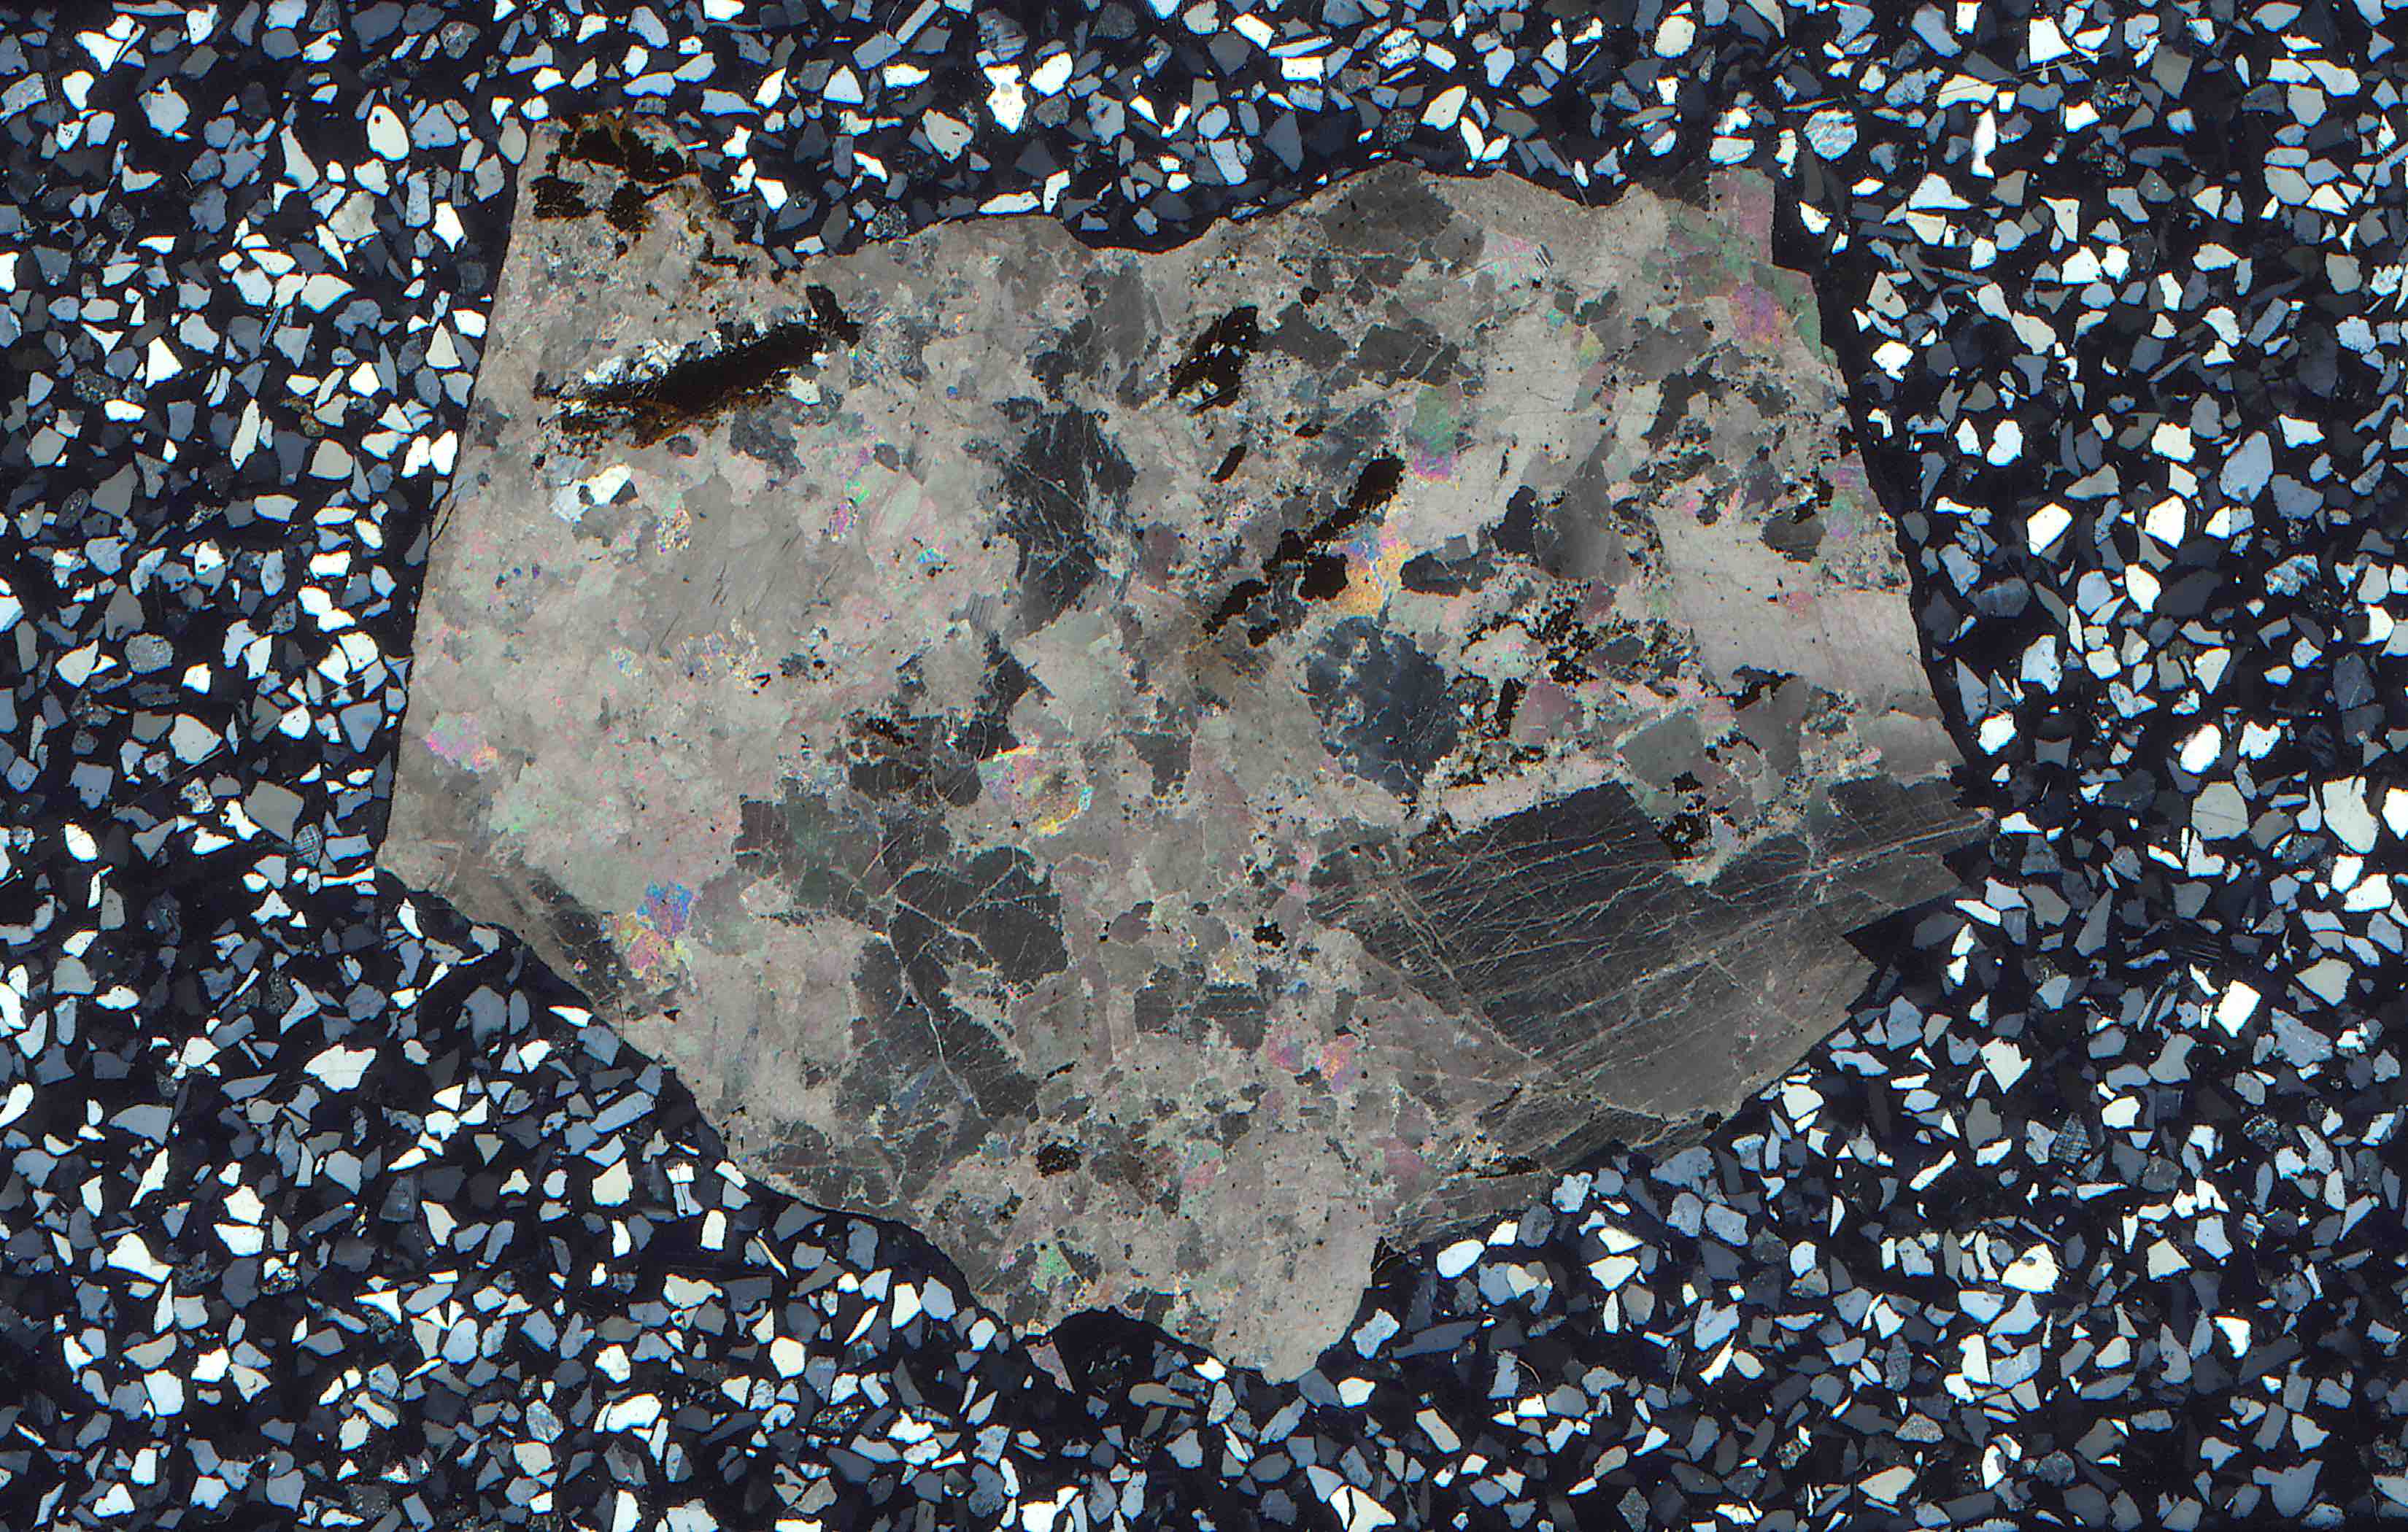 roscoelite and calcite in thin section from Czech Republic